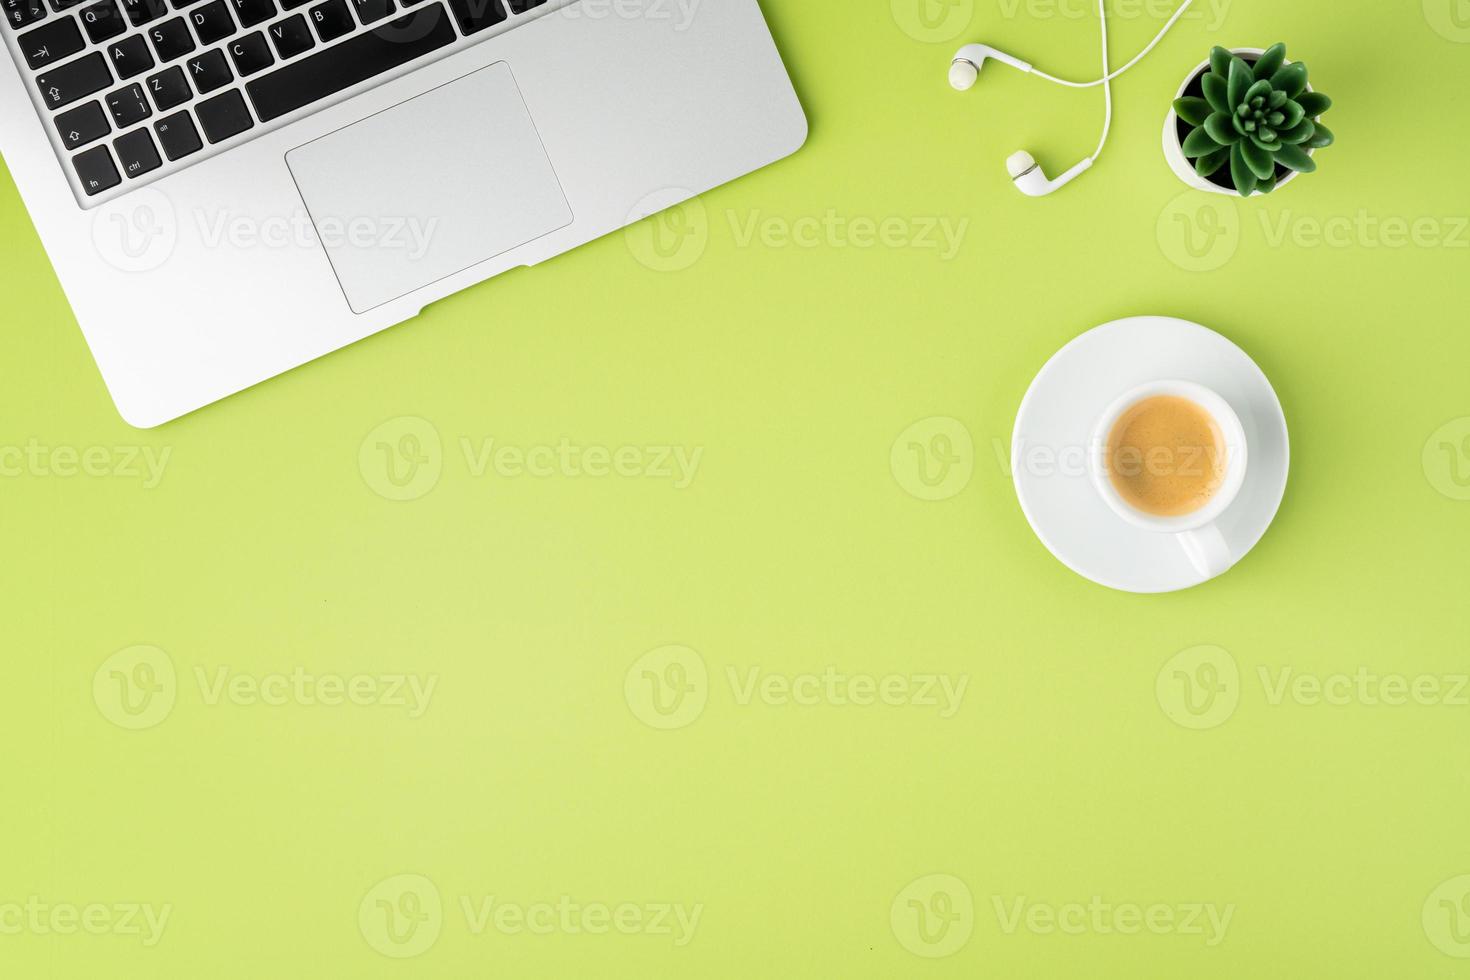 Horizontal of metallic laptop keyboard, white earphones and coffee cup on light green background photo